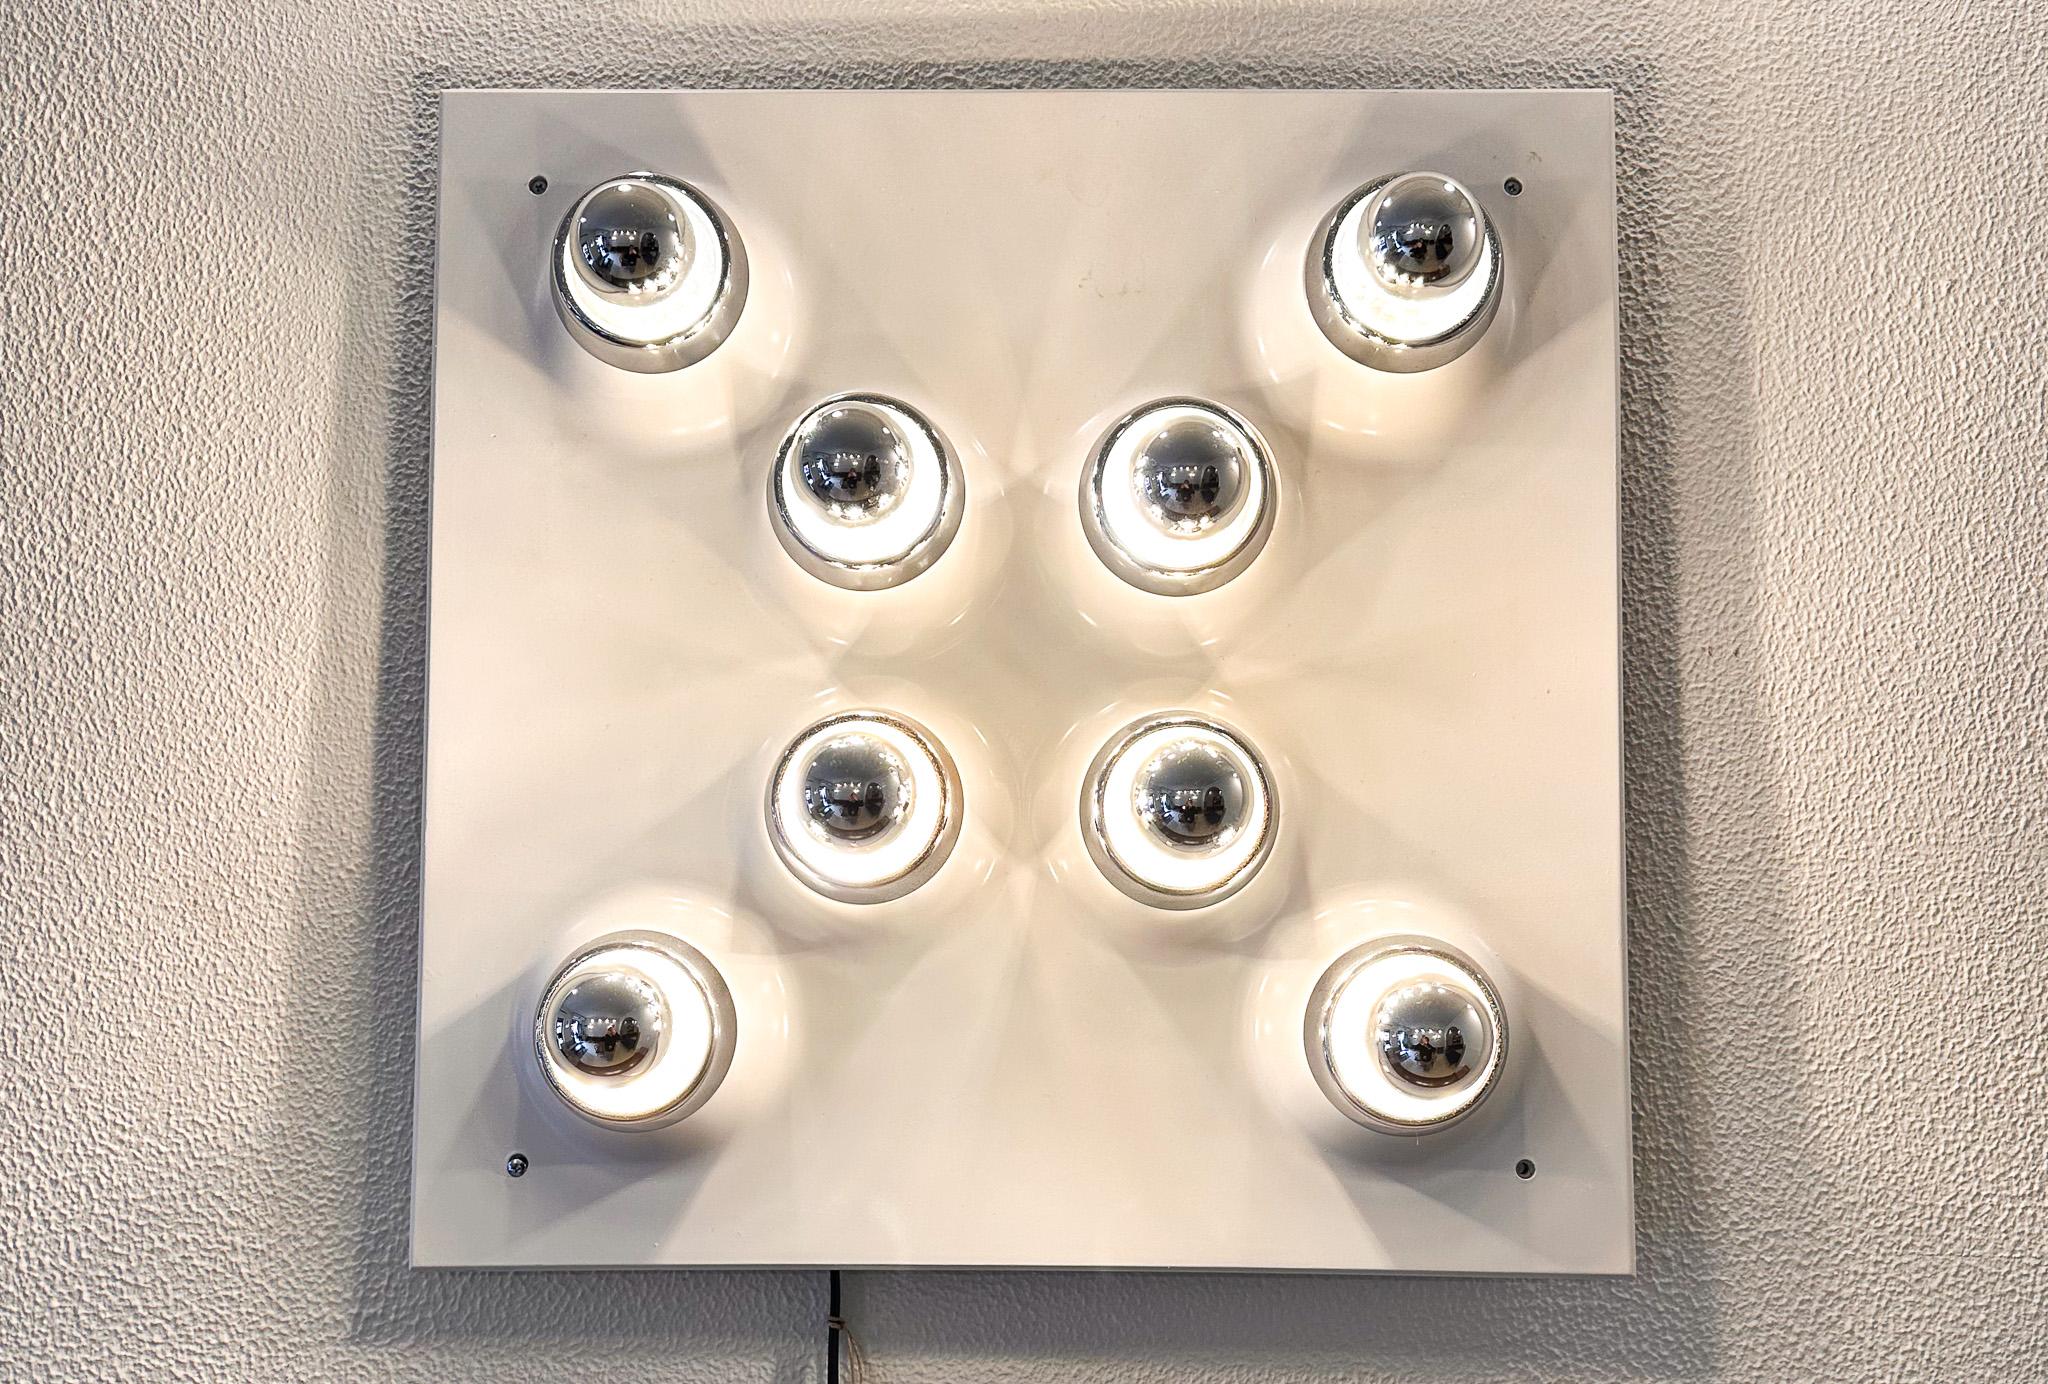 This is a vintage wall lamp reminiscent of the Space Age aesthetic popular in the 1970s. It features nine spherical, chrome-plated lights arranged in a uniform, organic cluster, which gives it a playful yet modern look. Each sphere is mounted on a